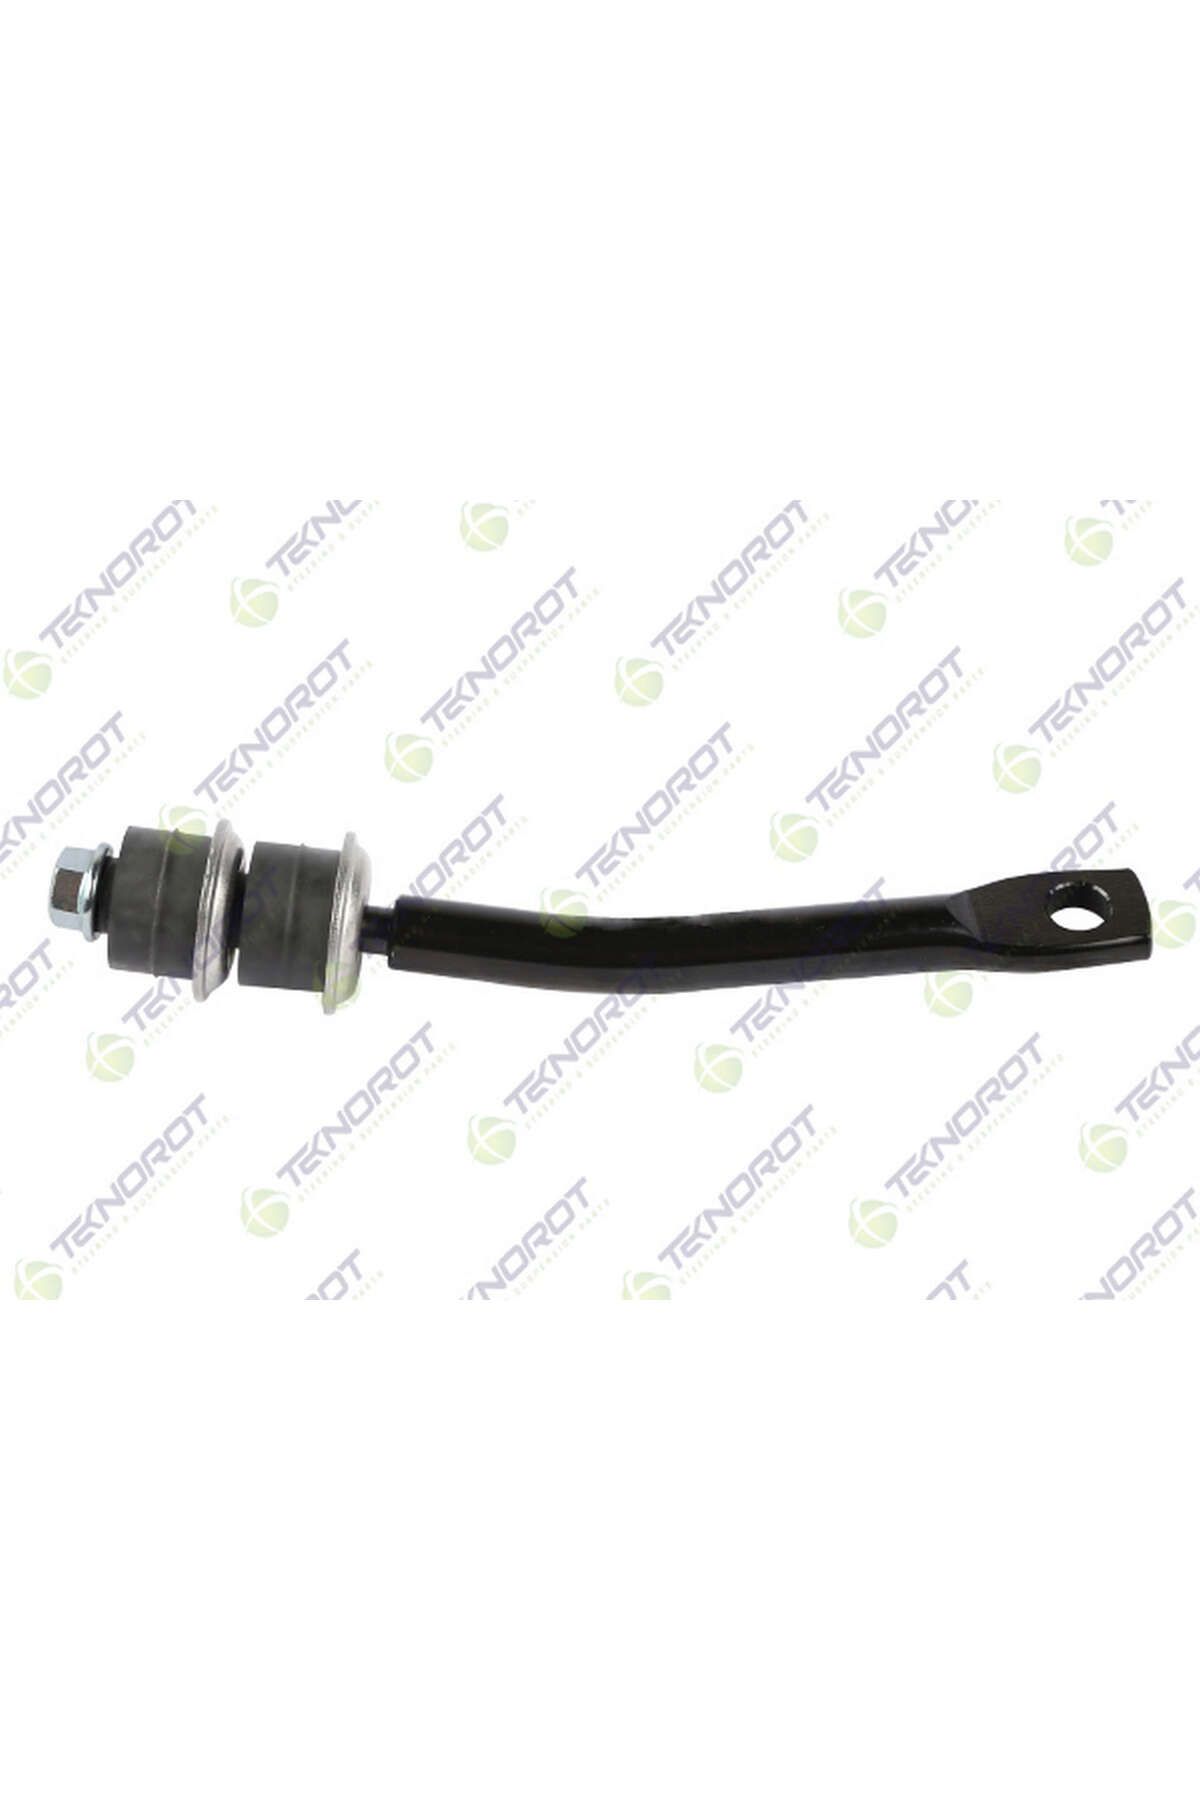 Teknorot Z-ROT ARKA SOL SSANGYONG-ACTYON 1ST GEN-2005-2010-SSANGYONG-REXTON Y250 FACELİFT -2007-2012 42058